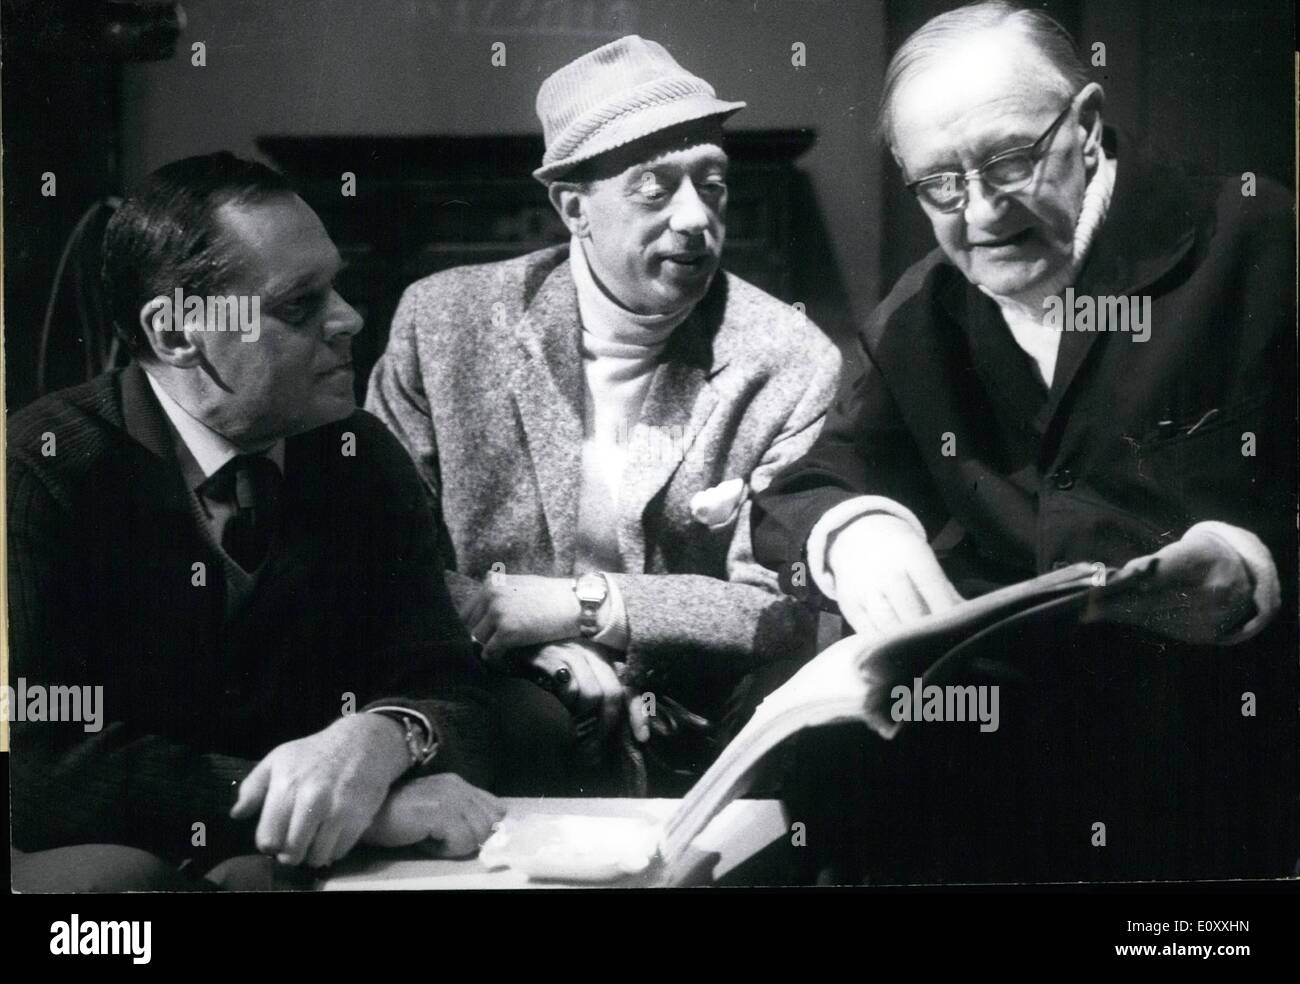 Jan. 01, 1968 - Pictured here are(from left to right) Albert Lieven, Horst Tappert, and Hans Schweikart. They are portraying roles in the murder mystery ''Mord mit Liebe'' (''Death with Love''). Chief Marshall Sir Basil Embry and General Lauris Norstad Stock Photo